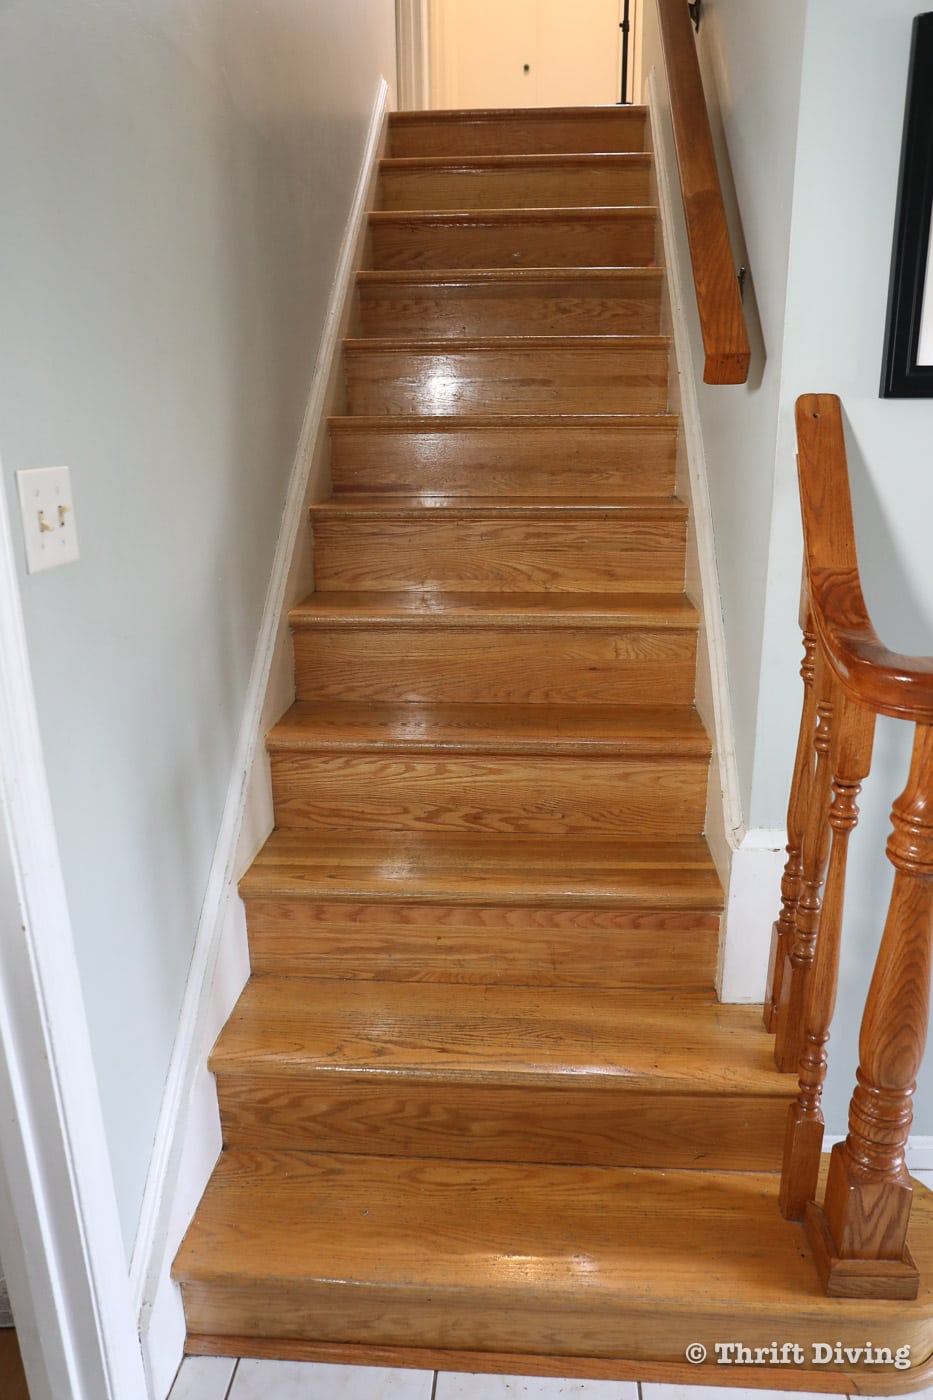 How to Install a Stair Runner - Should you paint wooden stairs? If you'd like to paint your stairs, here's how to do it, along with install a stair runner. - Thrift Diving